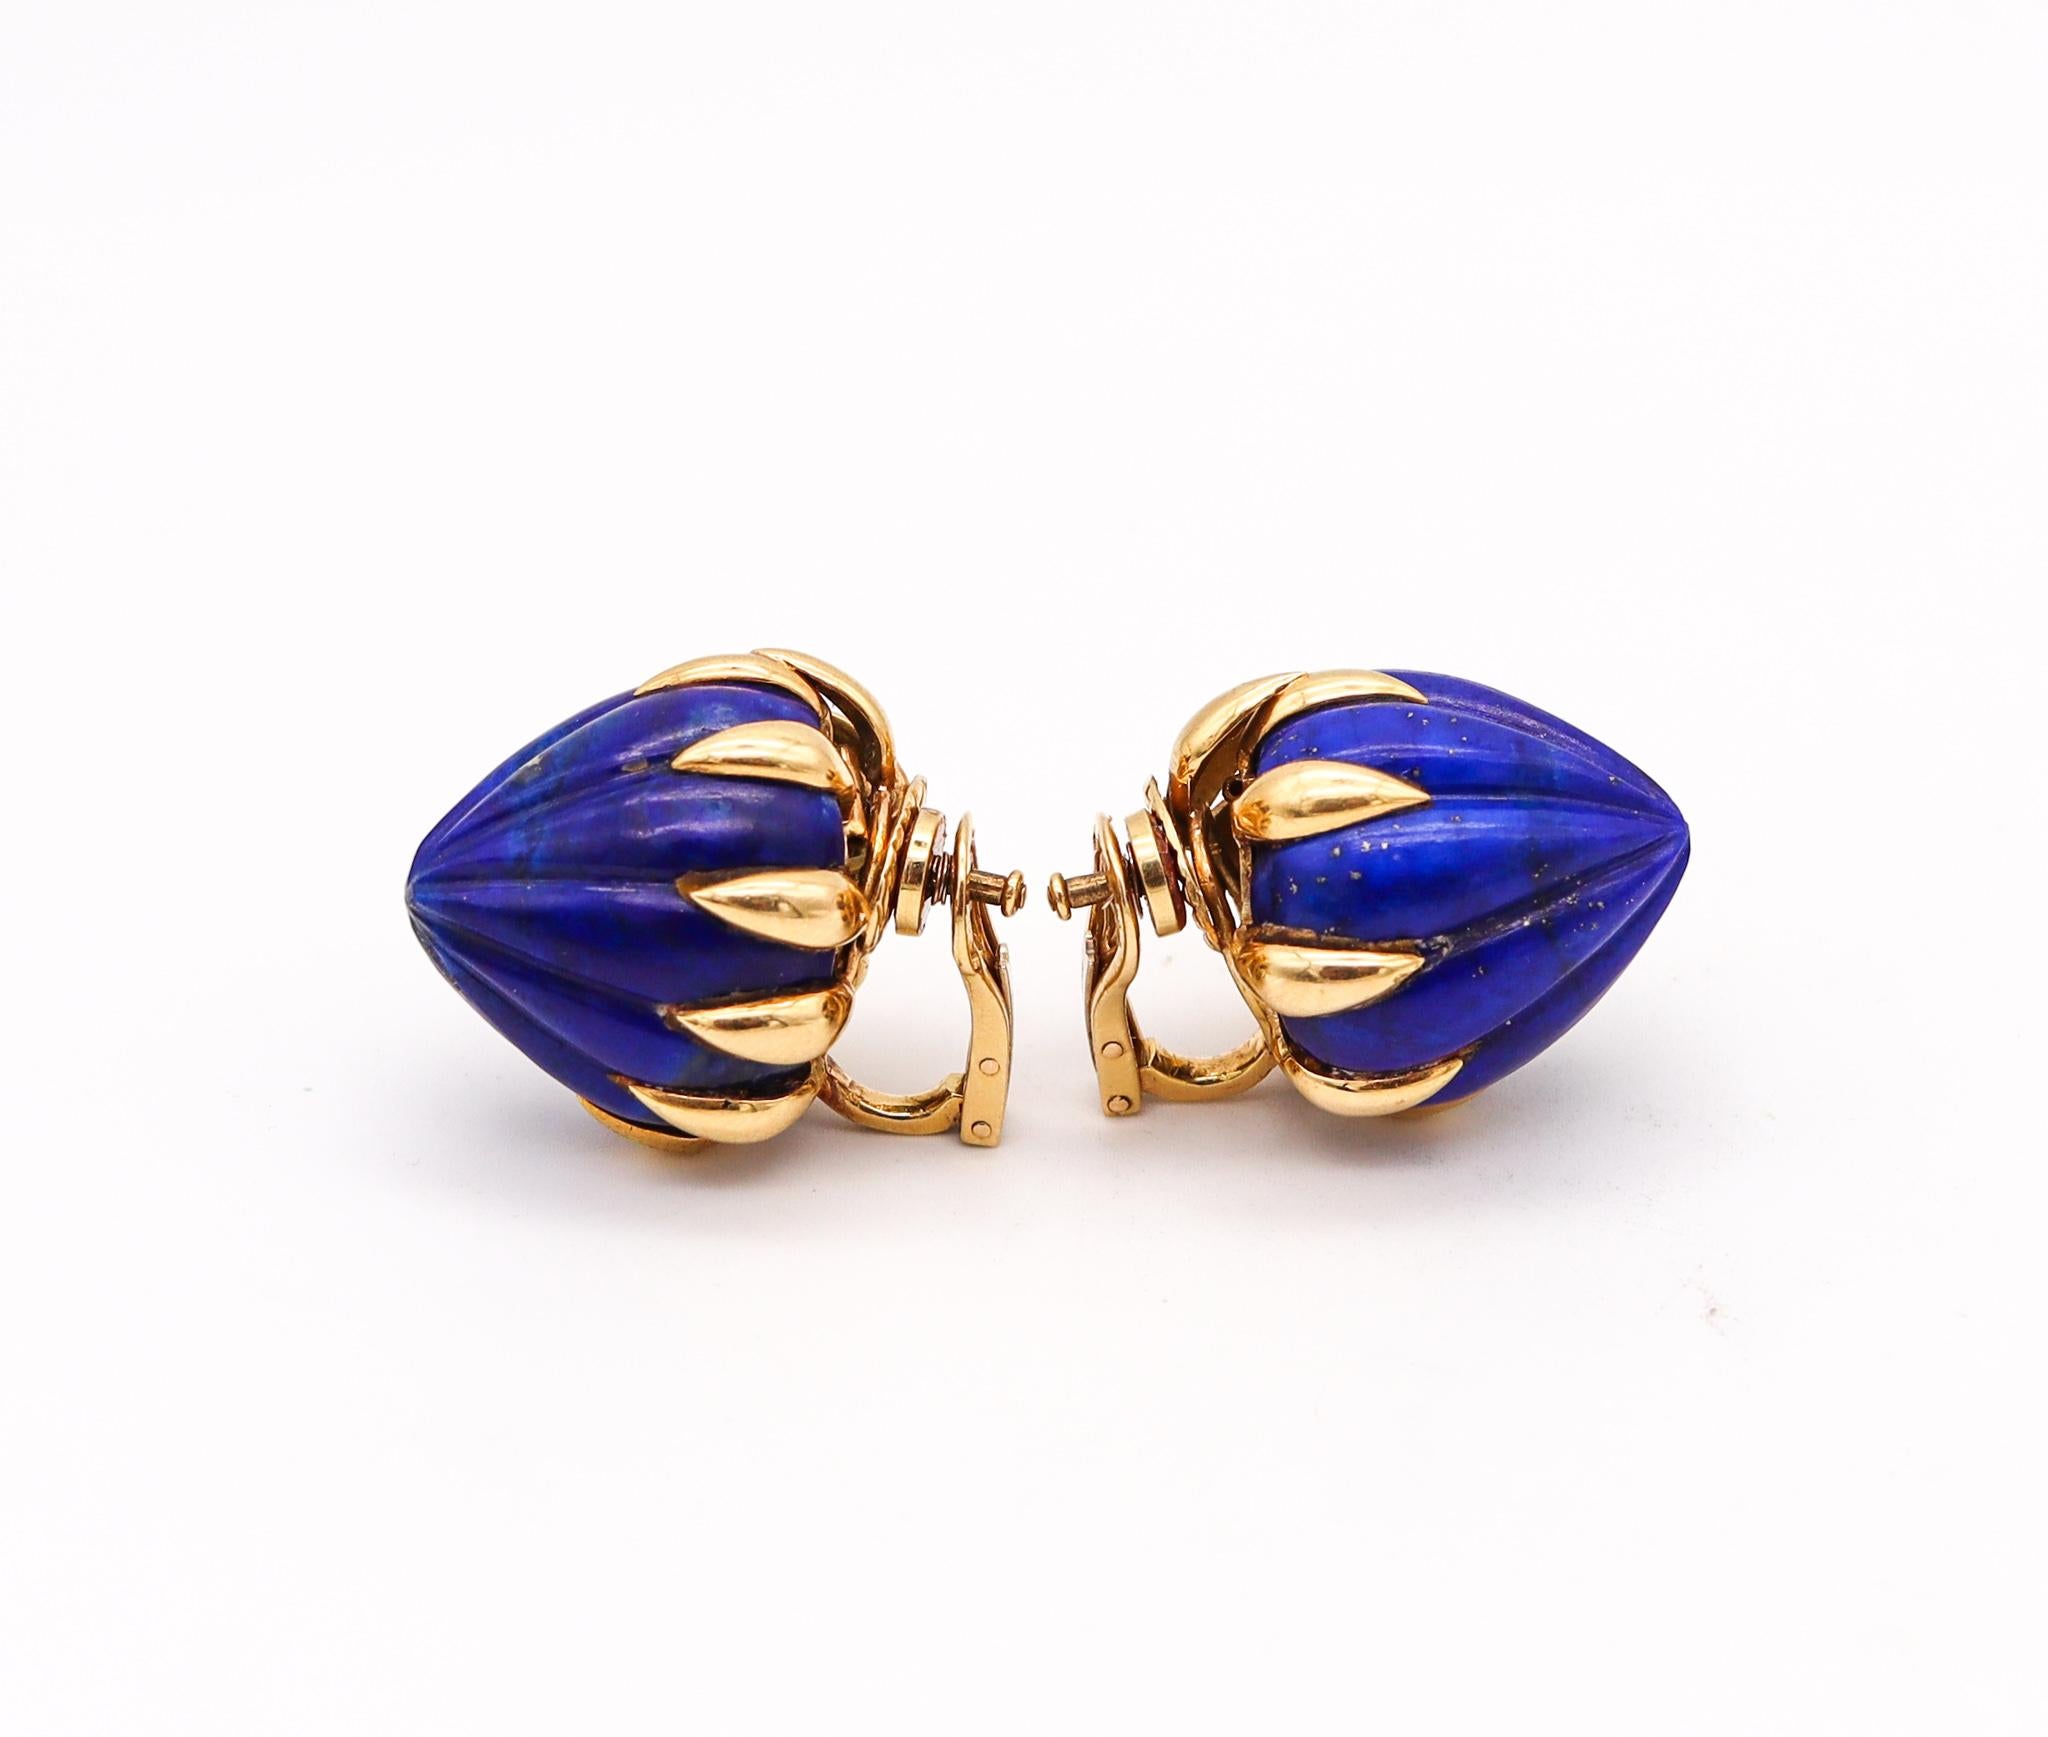 French retro modernist earrings attributed to Pierre Sterle.

Exceptional pair of sculptural clip on earrings, created in Paris France back in the 1960. This rare and voluptuous pieces are attributed to the workshop of Pierre Sterle. They was